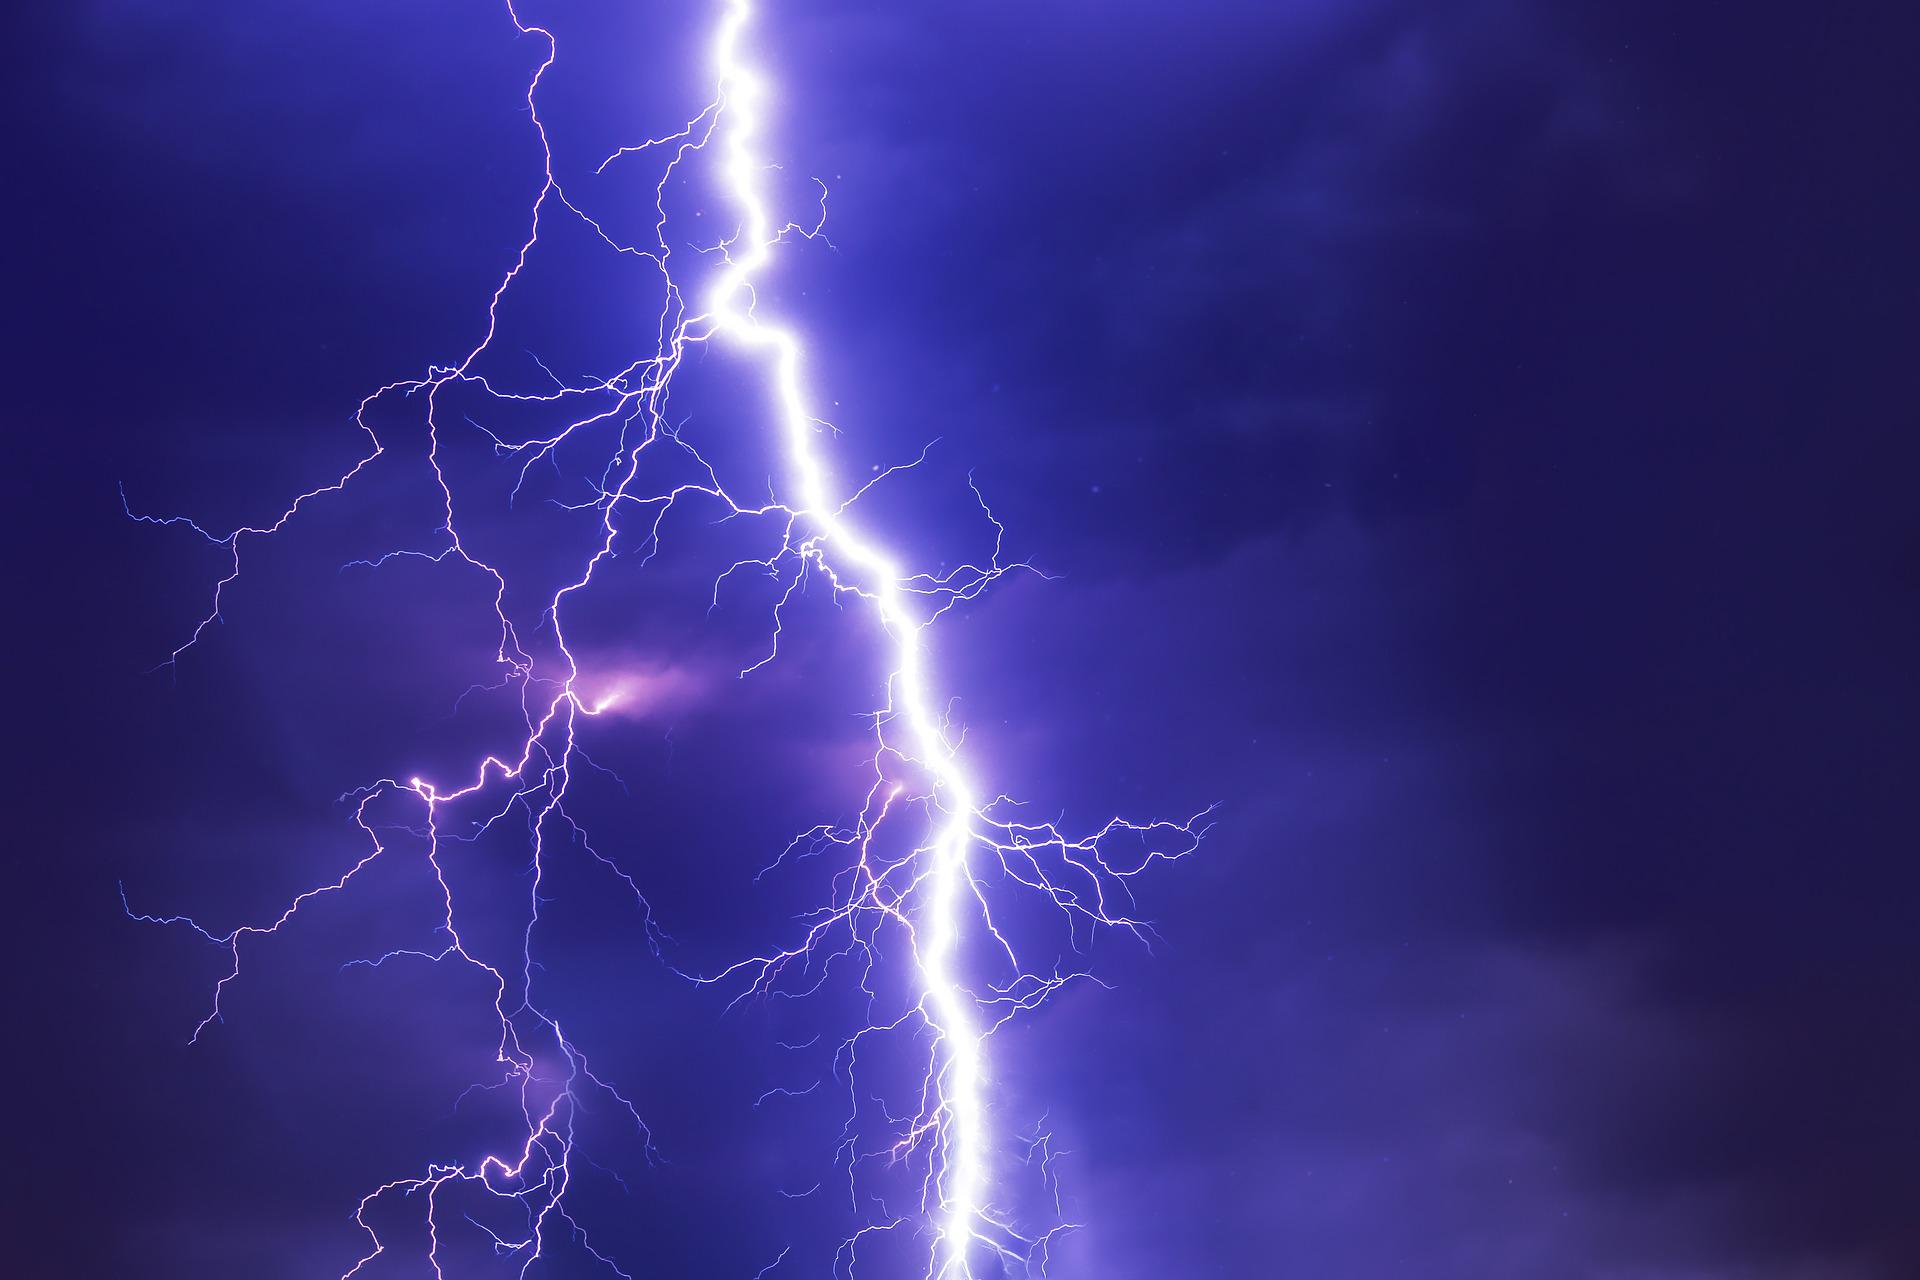 Lightning strikes in different parts of Tamil Nadu resulted in 5 deaths. (Wikimedia Commons)